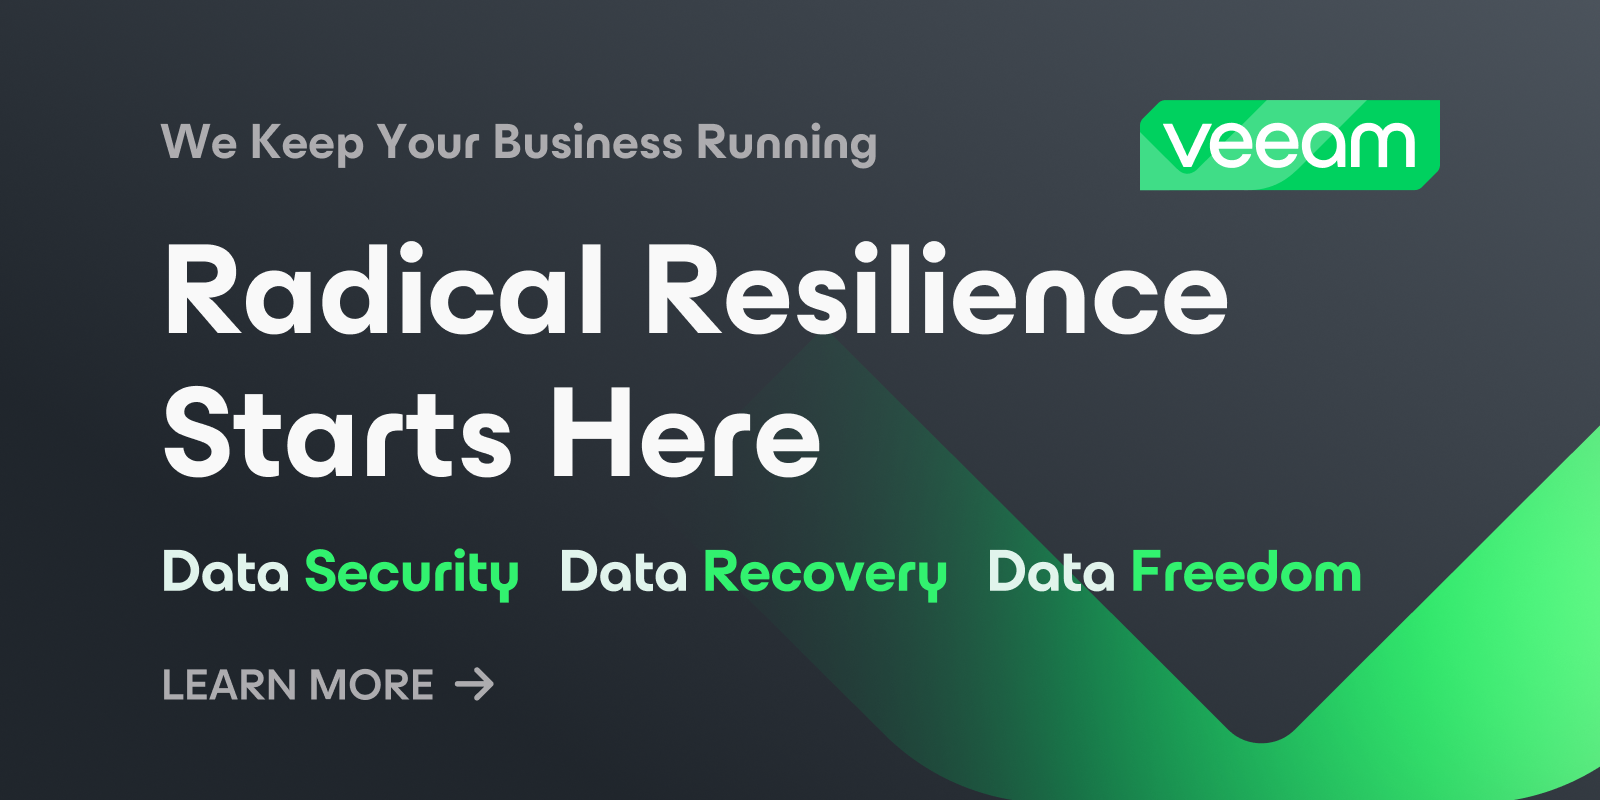 Modern Data Protection, Backup, & Recovery Software | Veeam